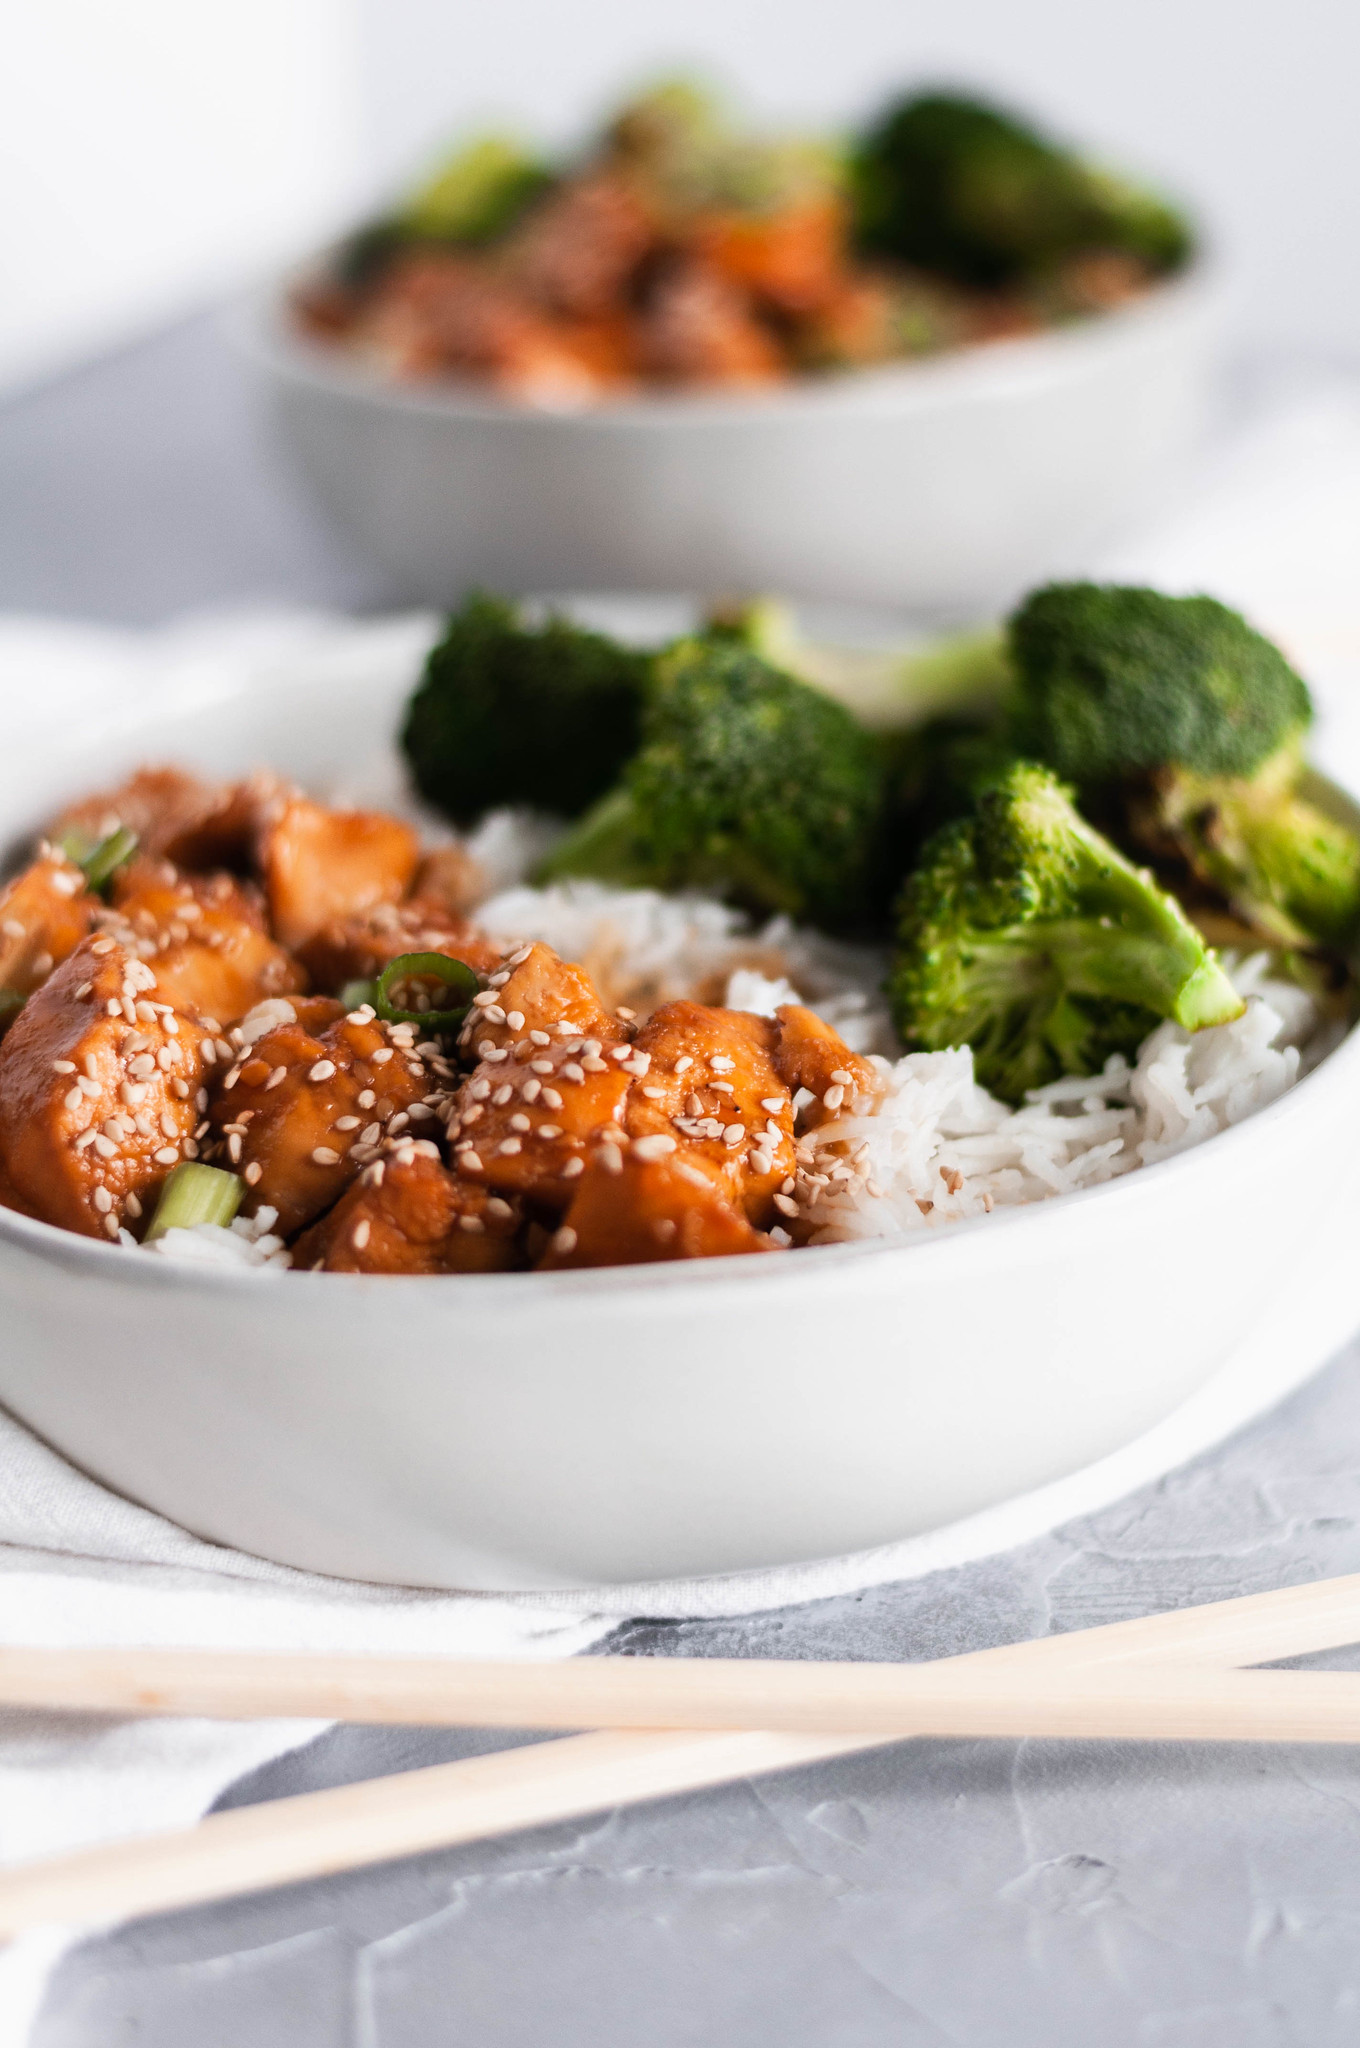 Make a quicker, healthier version of sesame chicken at home with this Instant Pot Sesame Chicken recipe. It literally takes minutes to prepare with easy to find ingredients.